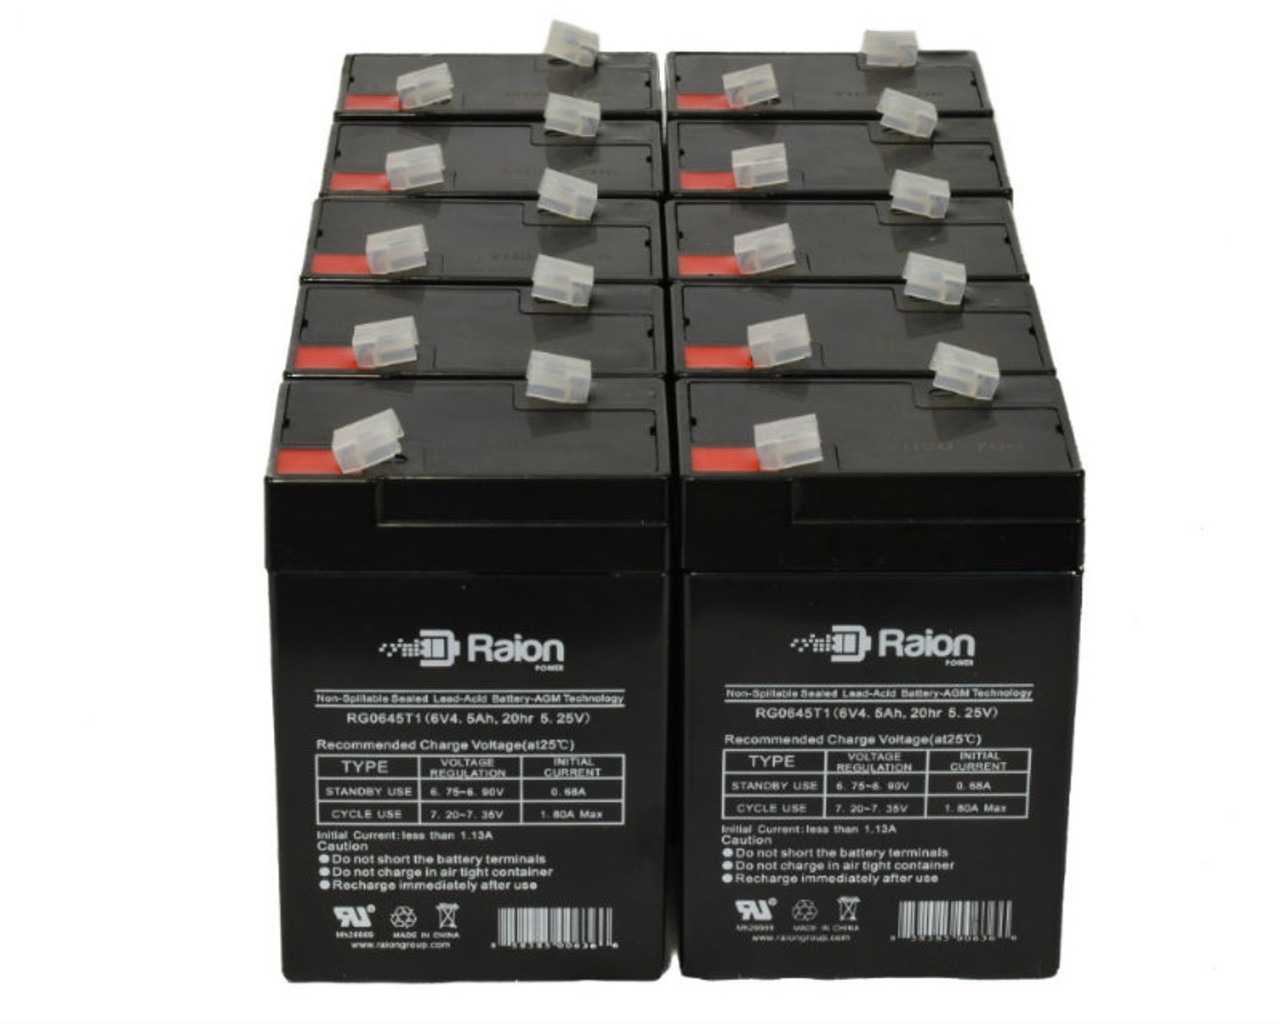 Raion Power 6V 4.5Ah Replacement Emergency Light Battery for Chloride 100-001-0145 - 10 Pack